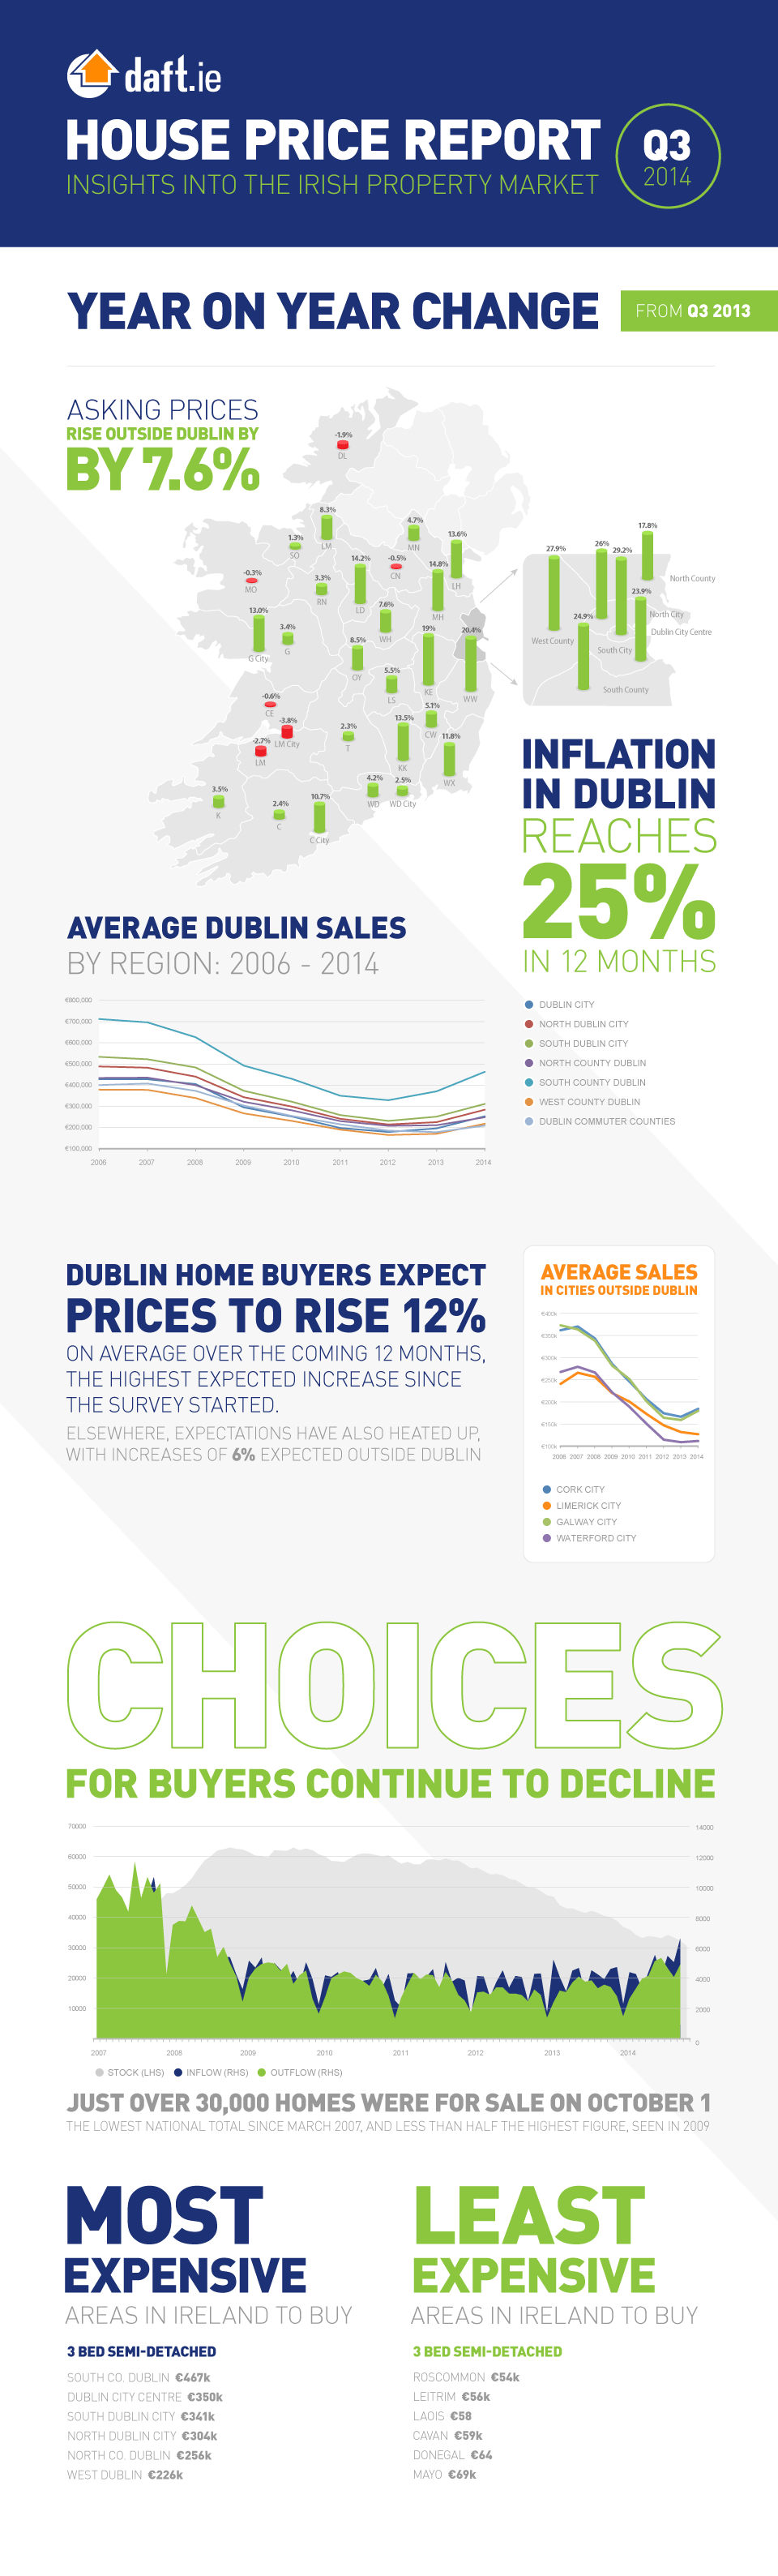 Daft.ie House Price Report: Q3 2014 Infographic